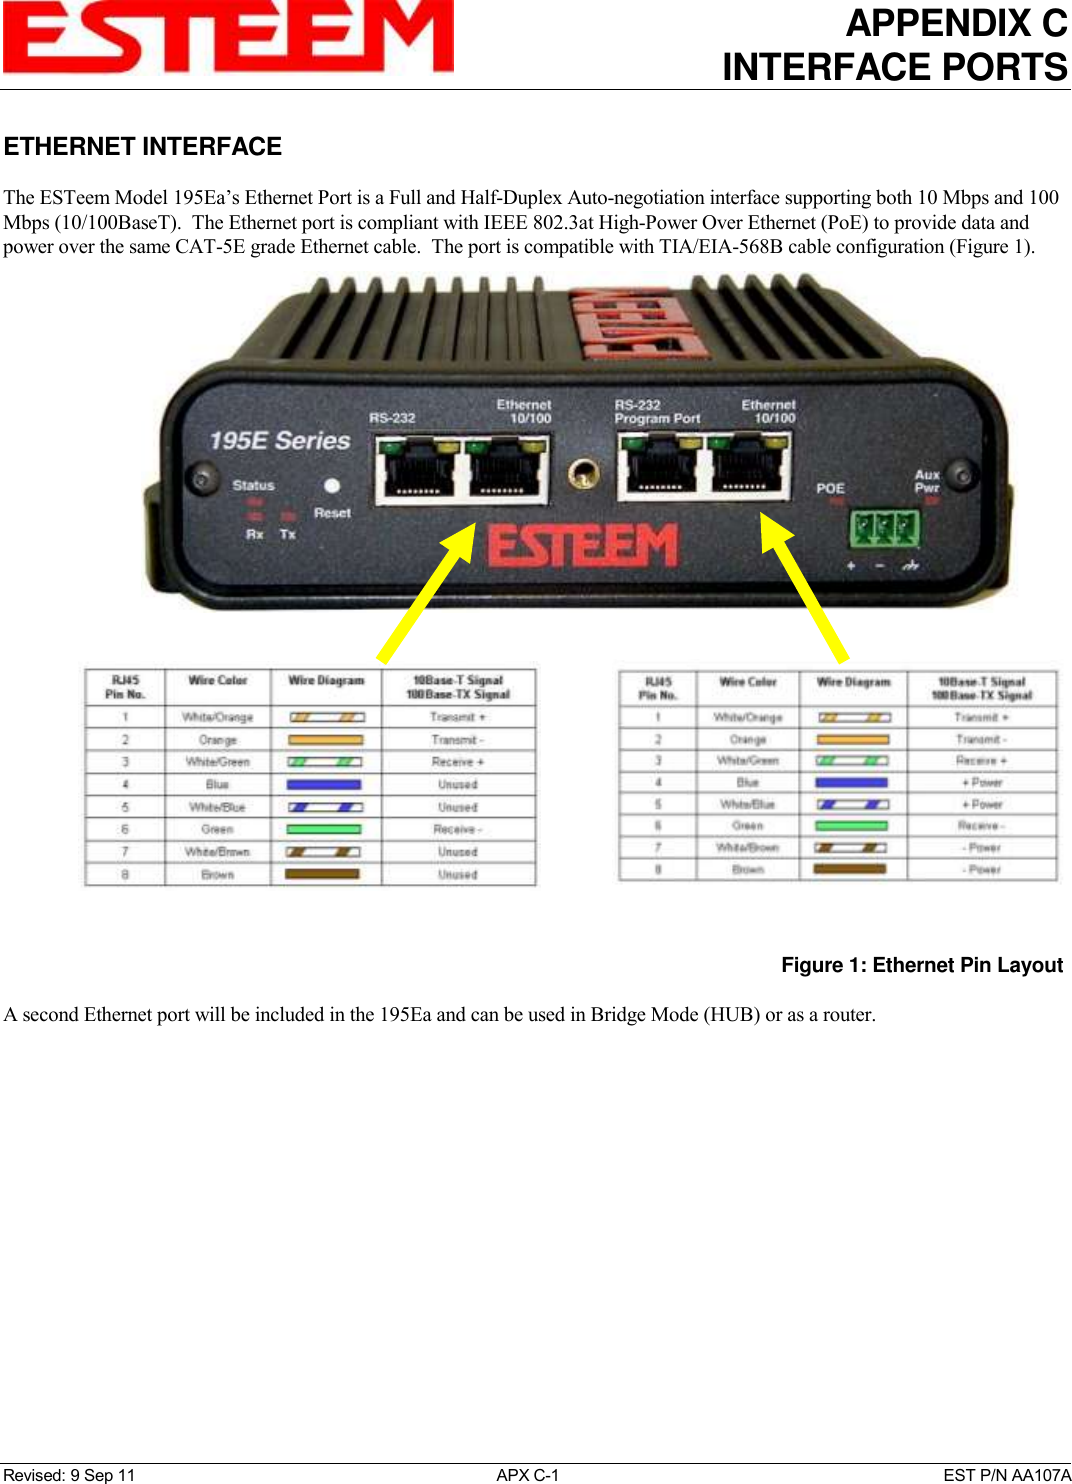 APPENDIX C INTERFACE PORTS   Revised: 9 Sep 11  APX C-1  EST P/N AA107A ETHERNET INTERFACE  The ESTeem Model 195Ea’s Ethernet Port is a Full and Half-Duplex Auto-negotiation interface supporting both 10 Mbps and 100 Mbps (10/100BaseT).  The Ethernet port is compliant with IEEE 802.3at High-Power Over Ethernet (PoE) to provide data and power over the same CAT-5E grade Ethernet cable.  The port is compatible with TIA/EIA-568B cable configuration (Figure 1).  A second Ethernet port will be included in the 195Ea and can be used in Bridge Mode (HUB) or as a router.  Figure 1: Ethernet Pin Layout   